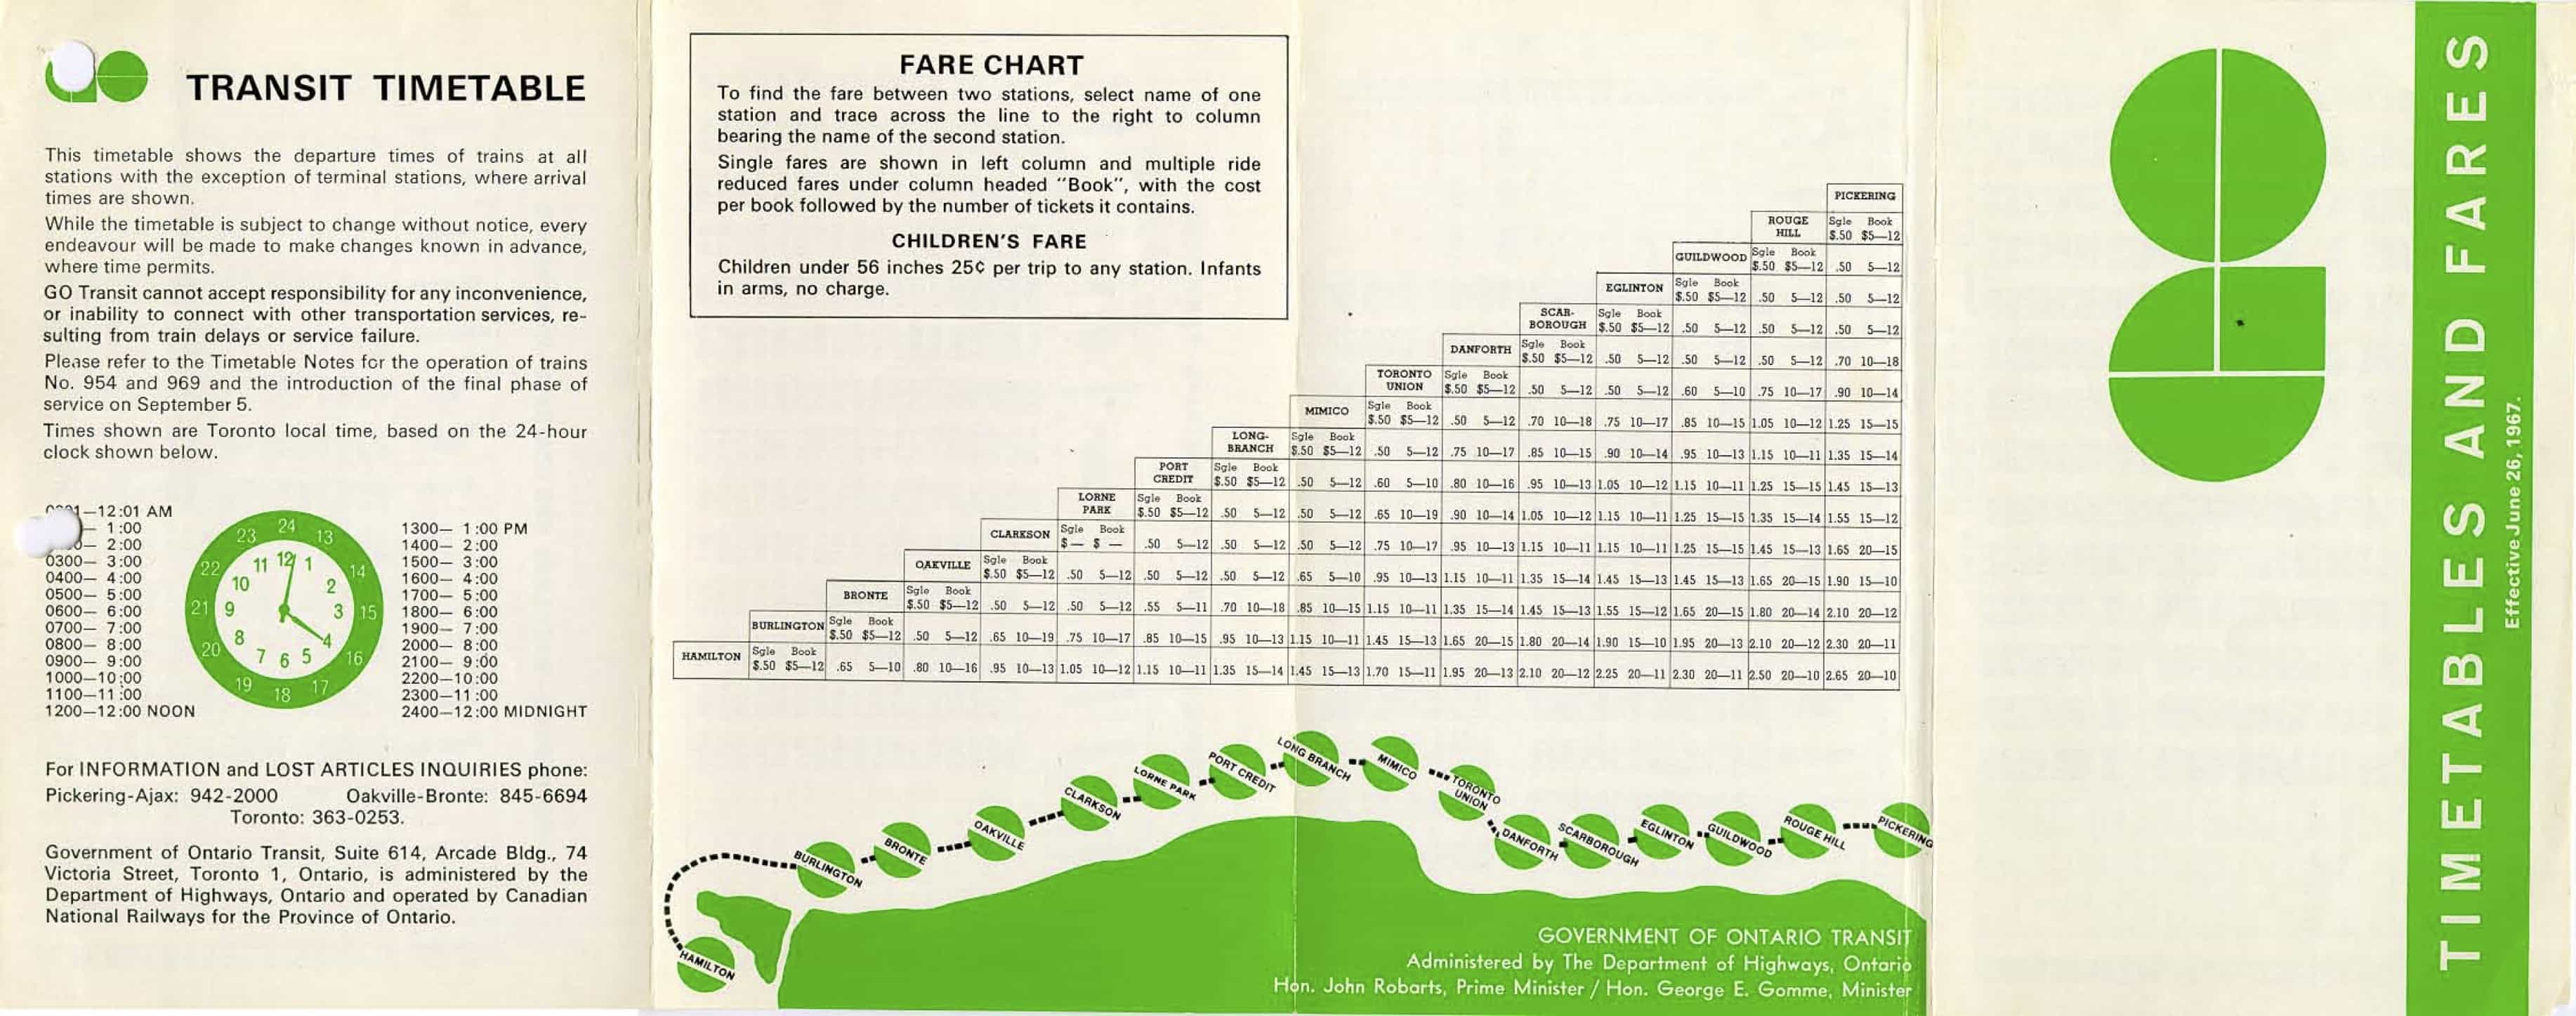 GO transit timetable 1960s page 1